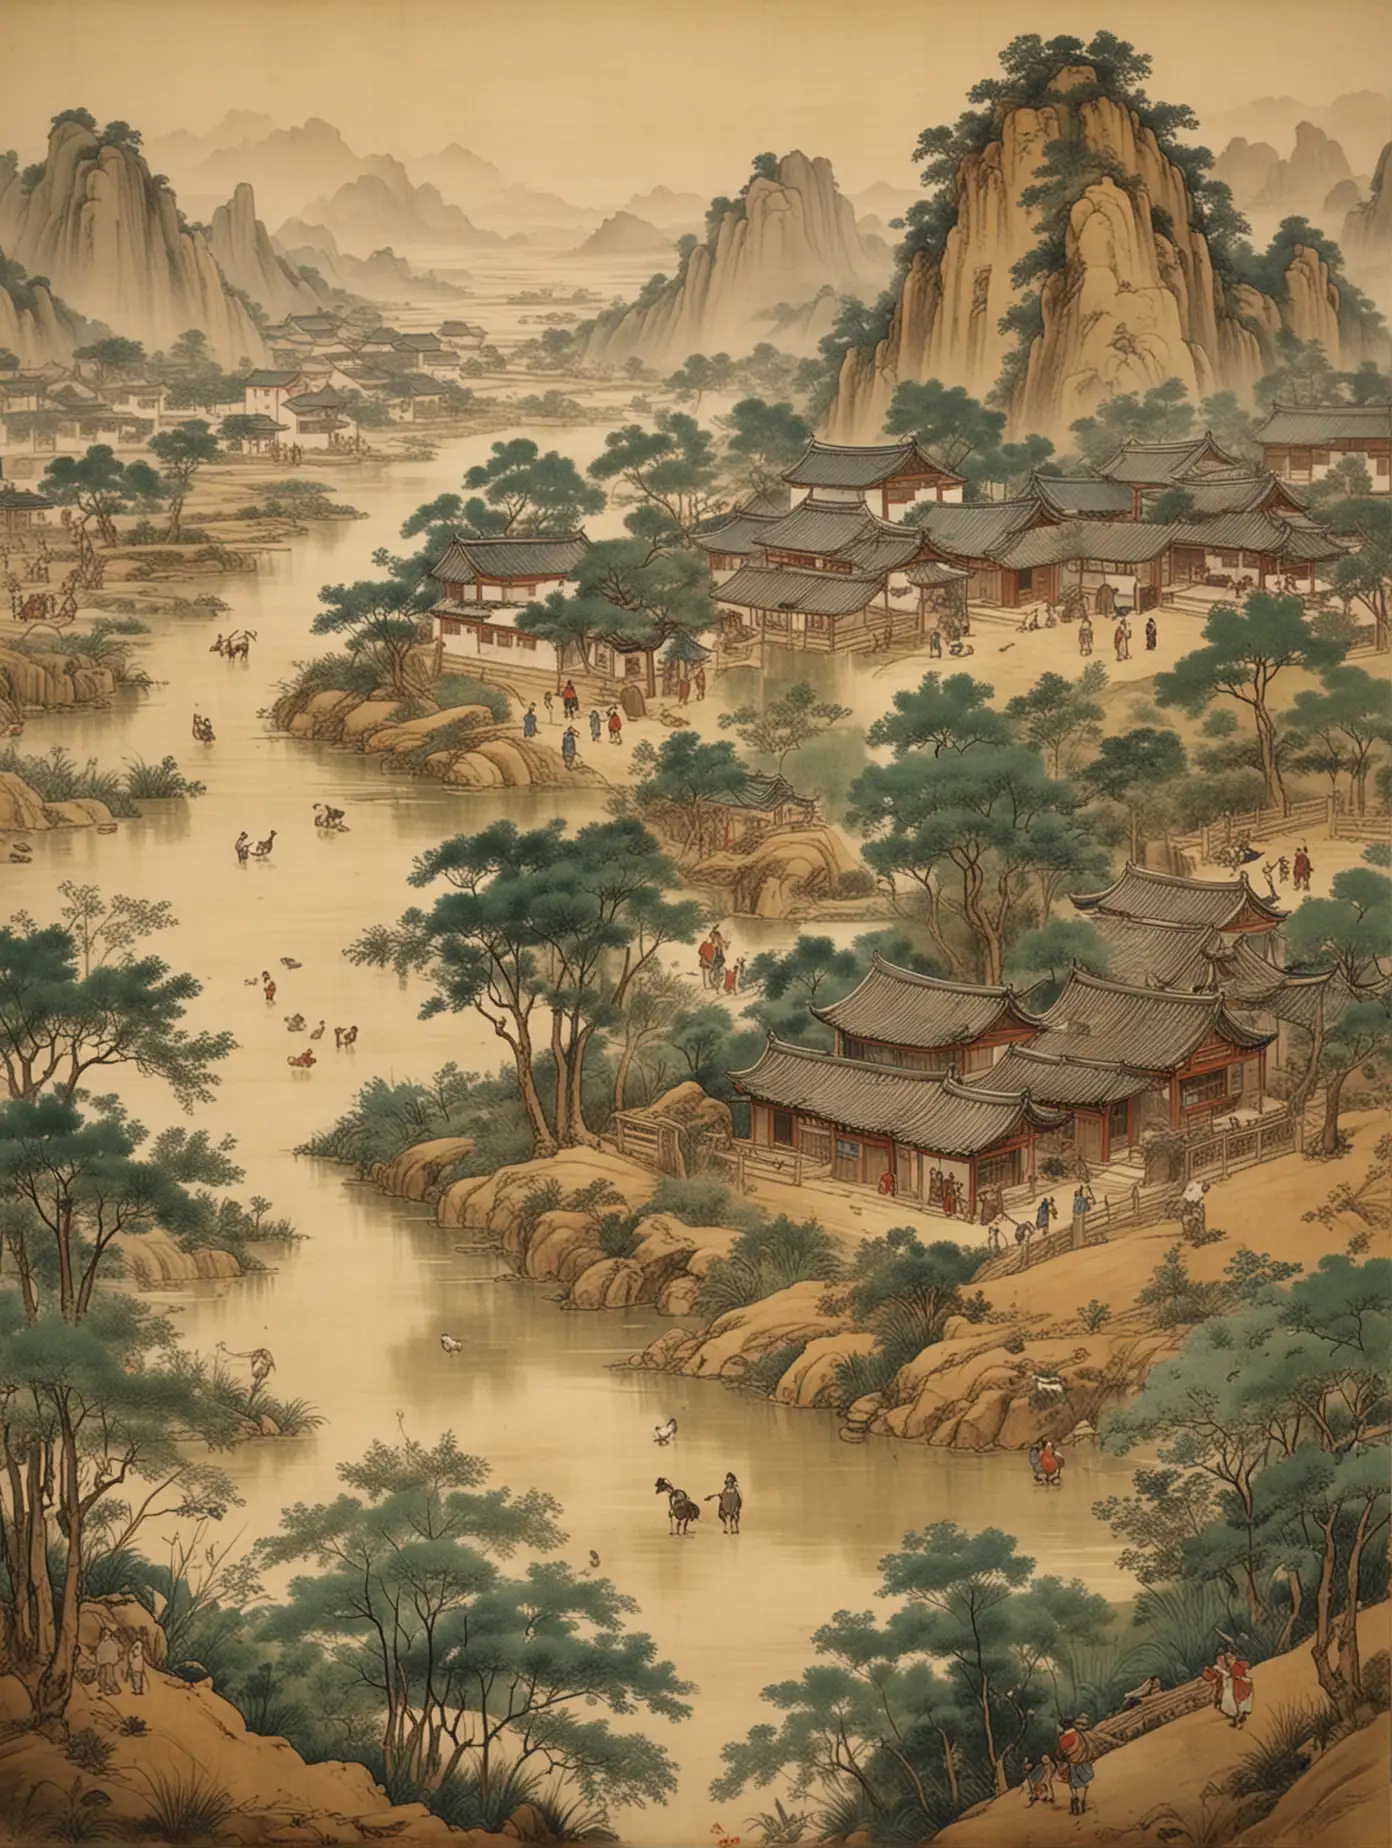 Meticulous Brushwork Depicts Song Dynasty Pastoral Landscape with Farmland and Cottages